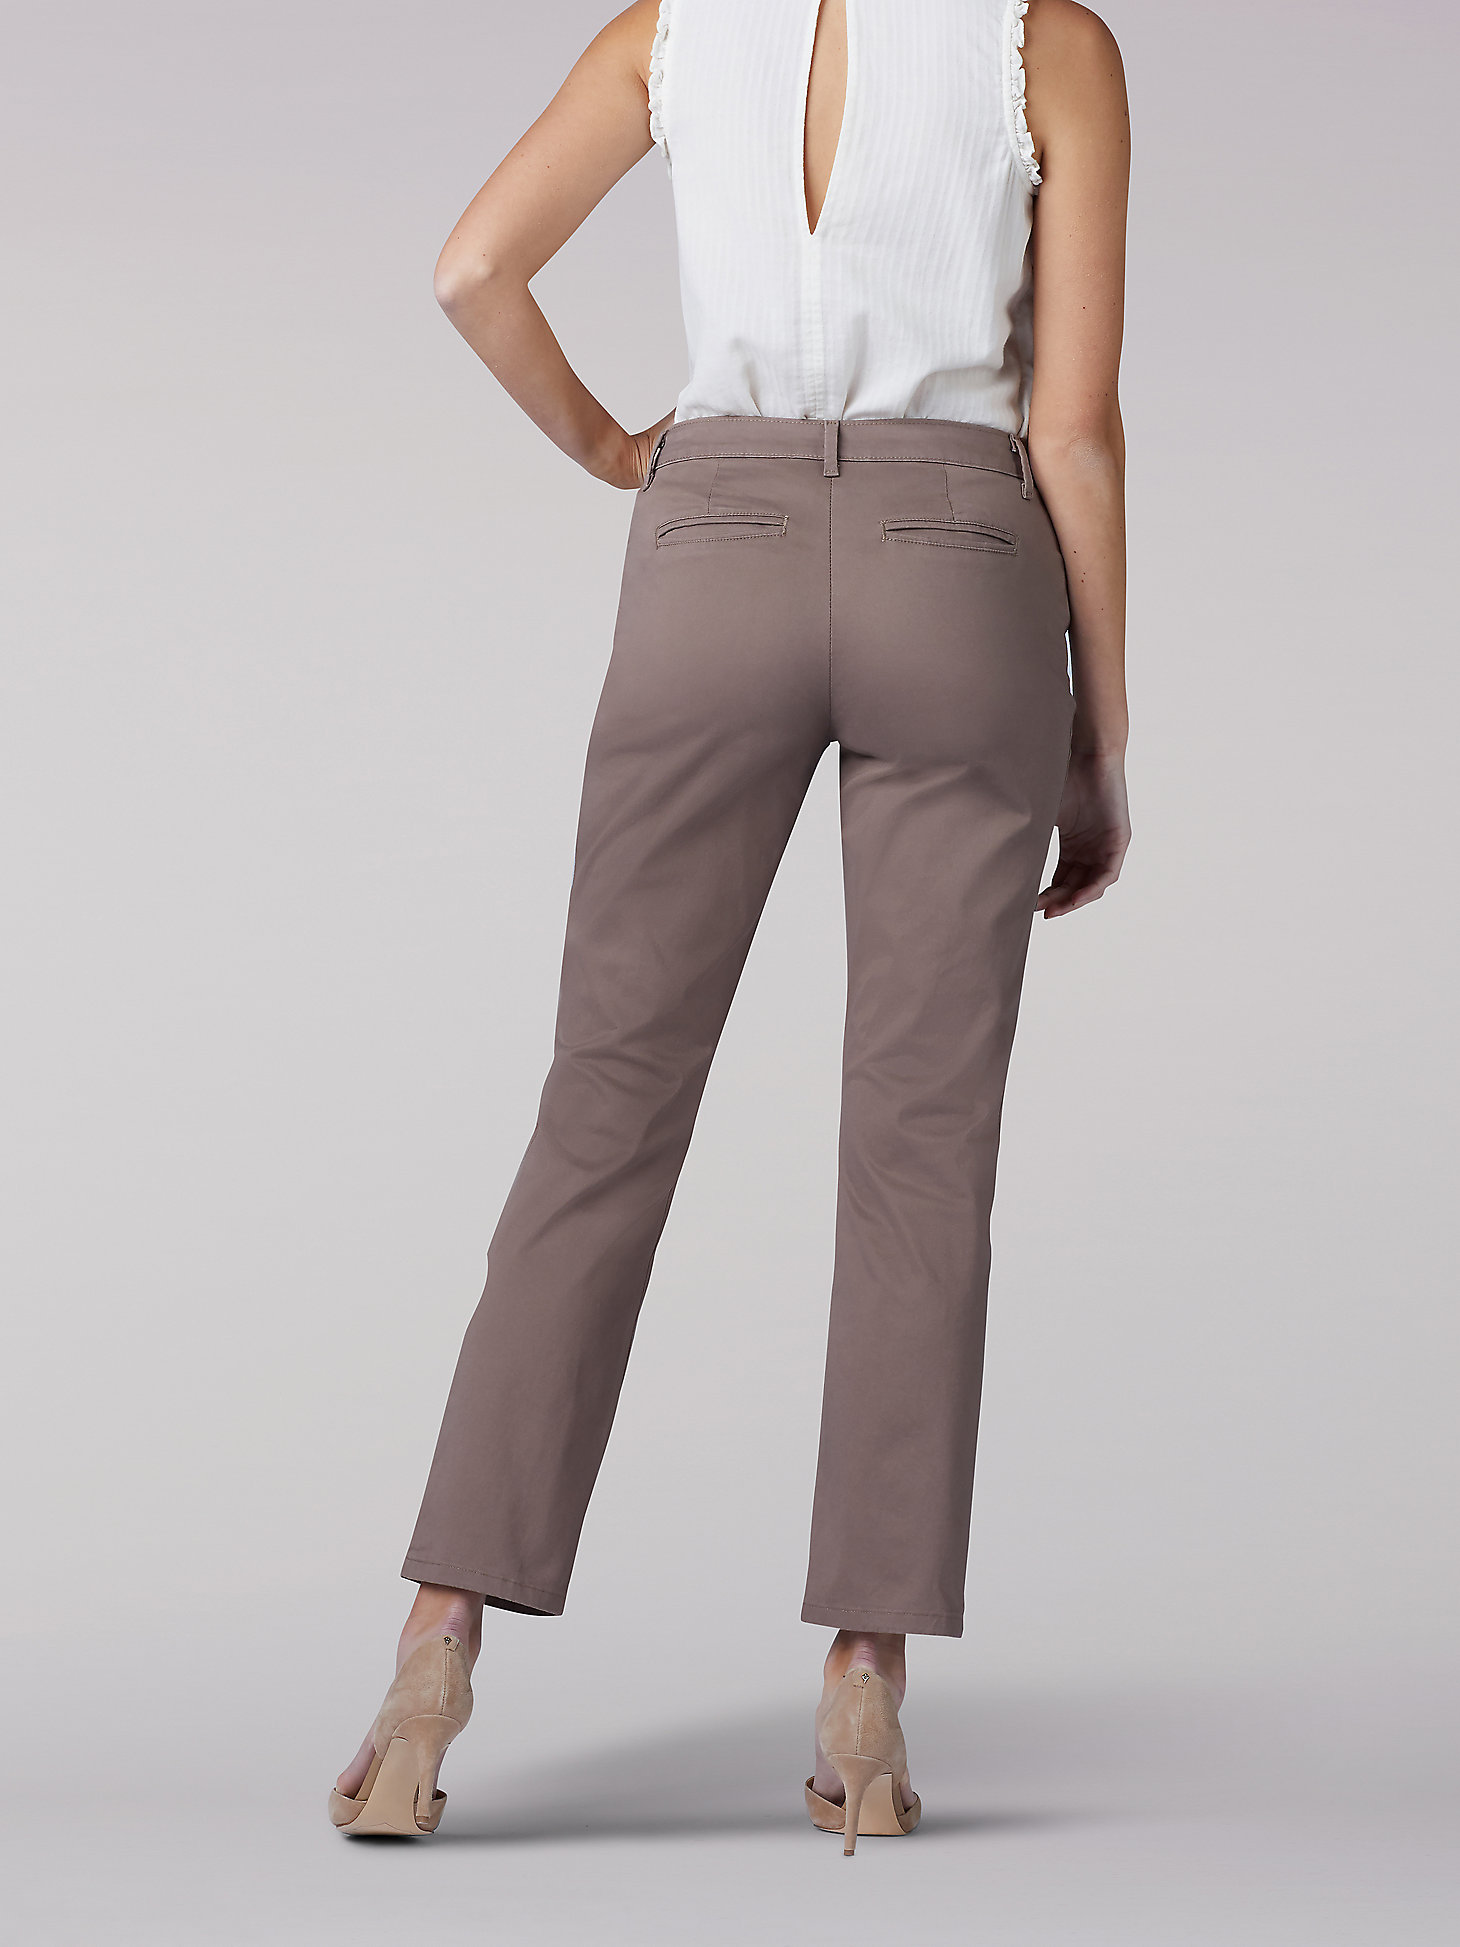 Women’s Relaxed Fit Straight Leg Pant (All Day Pant) (Petite) in Falcon alternative view 1